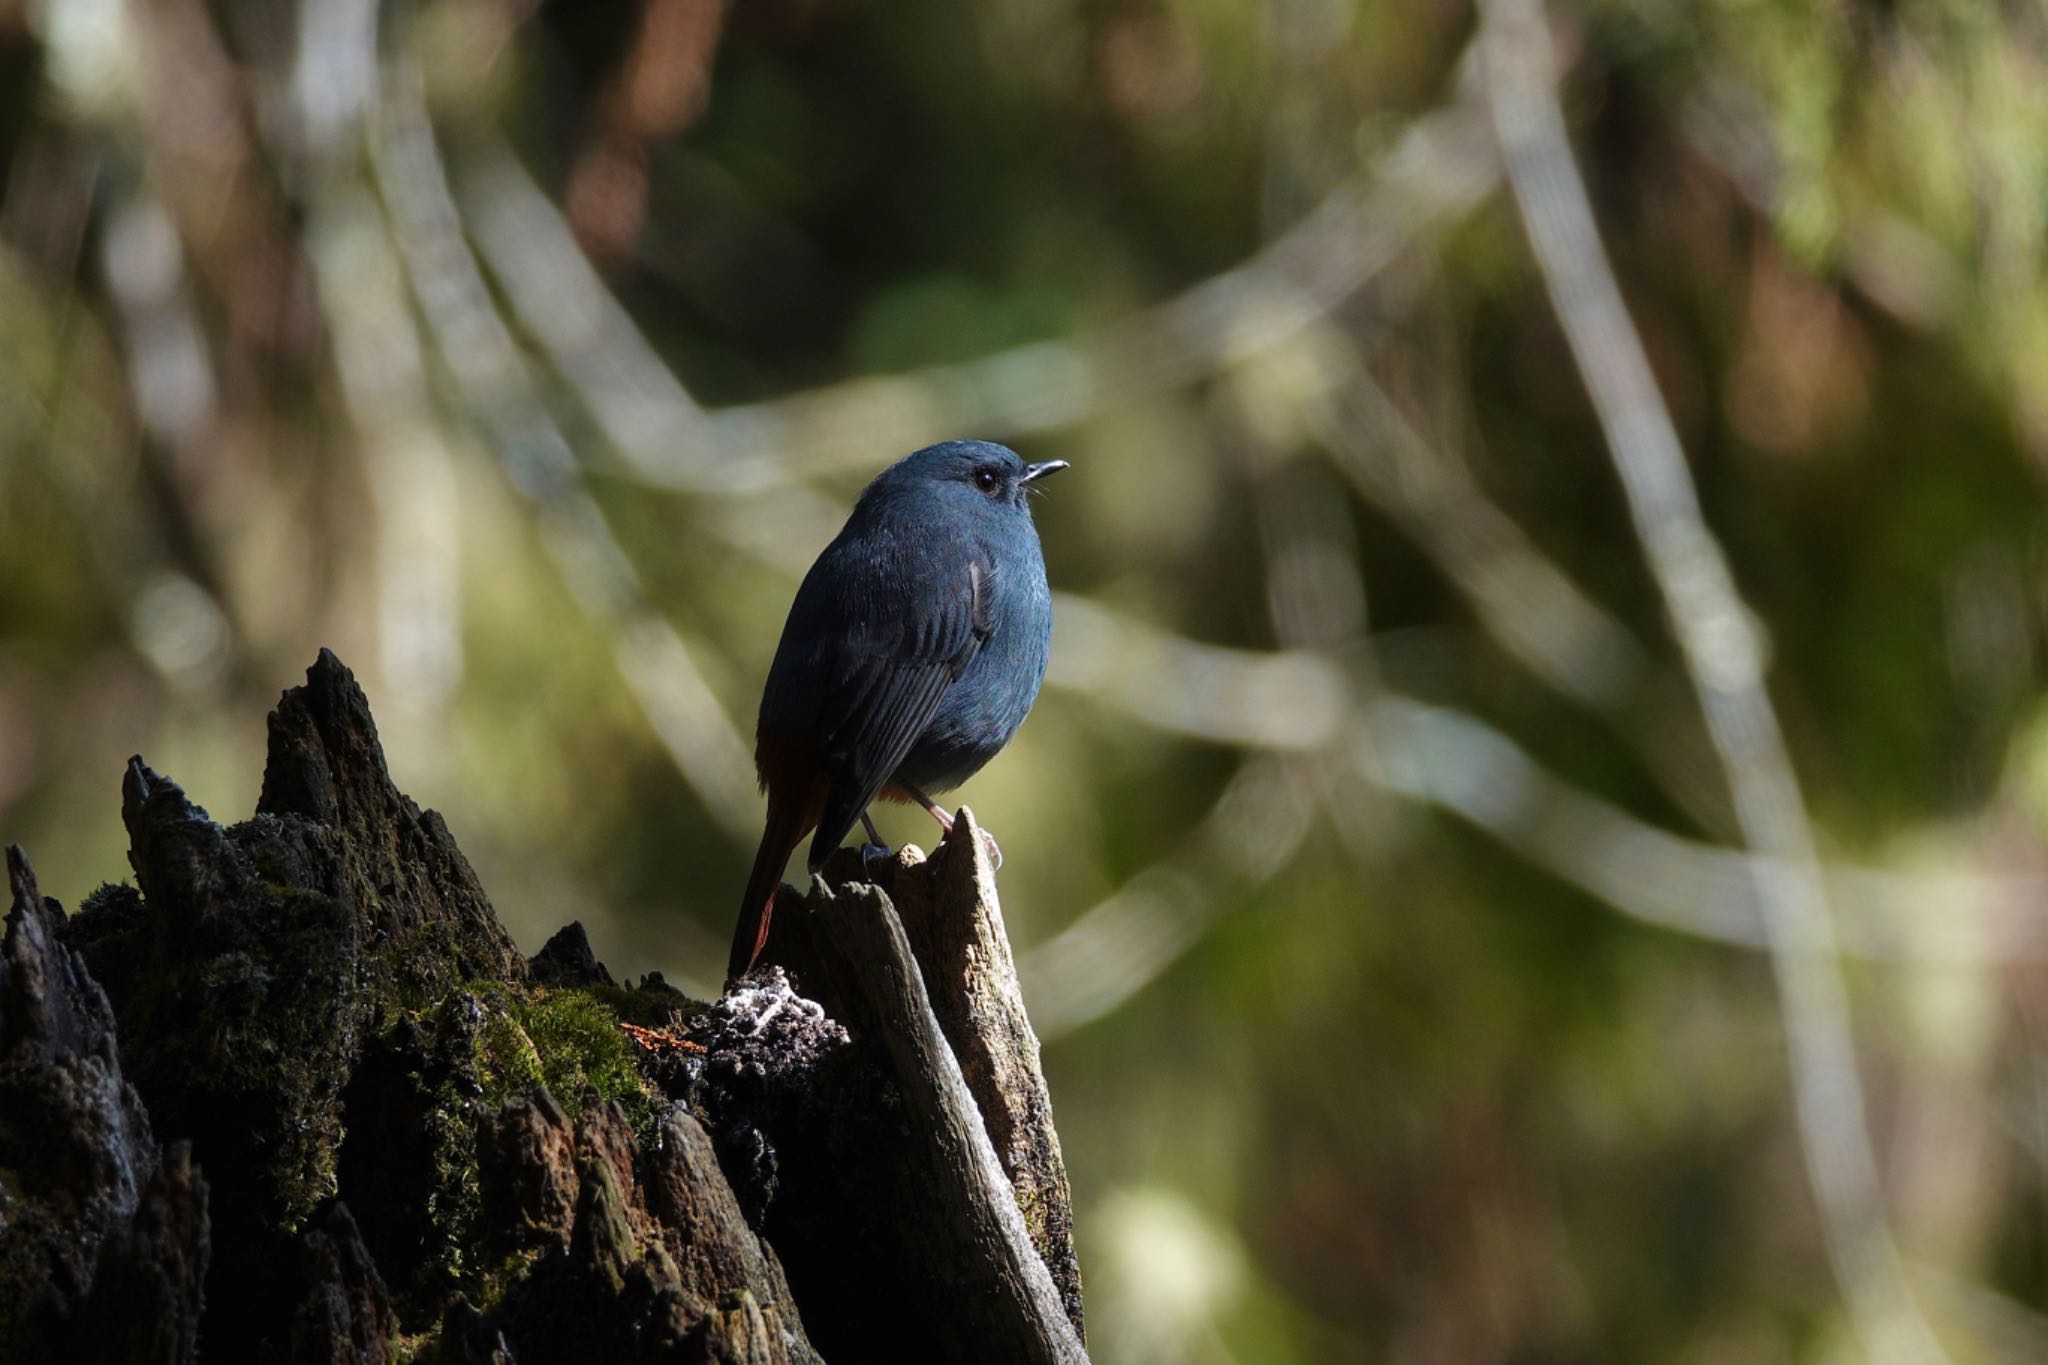 Photo of Plumbeous Water Redstart at 阿里山国家森林遊楽区 by のどか